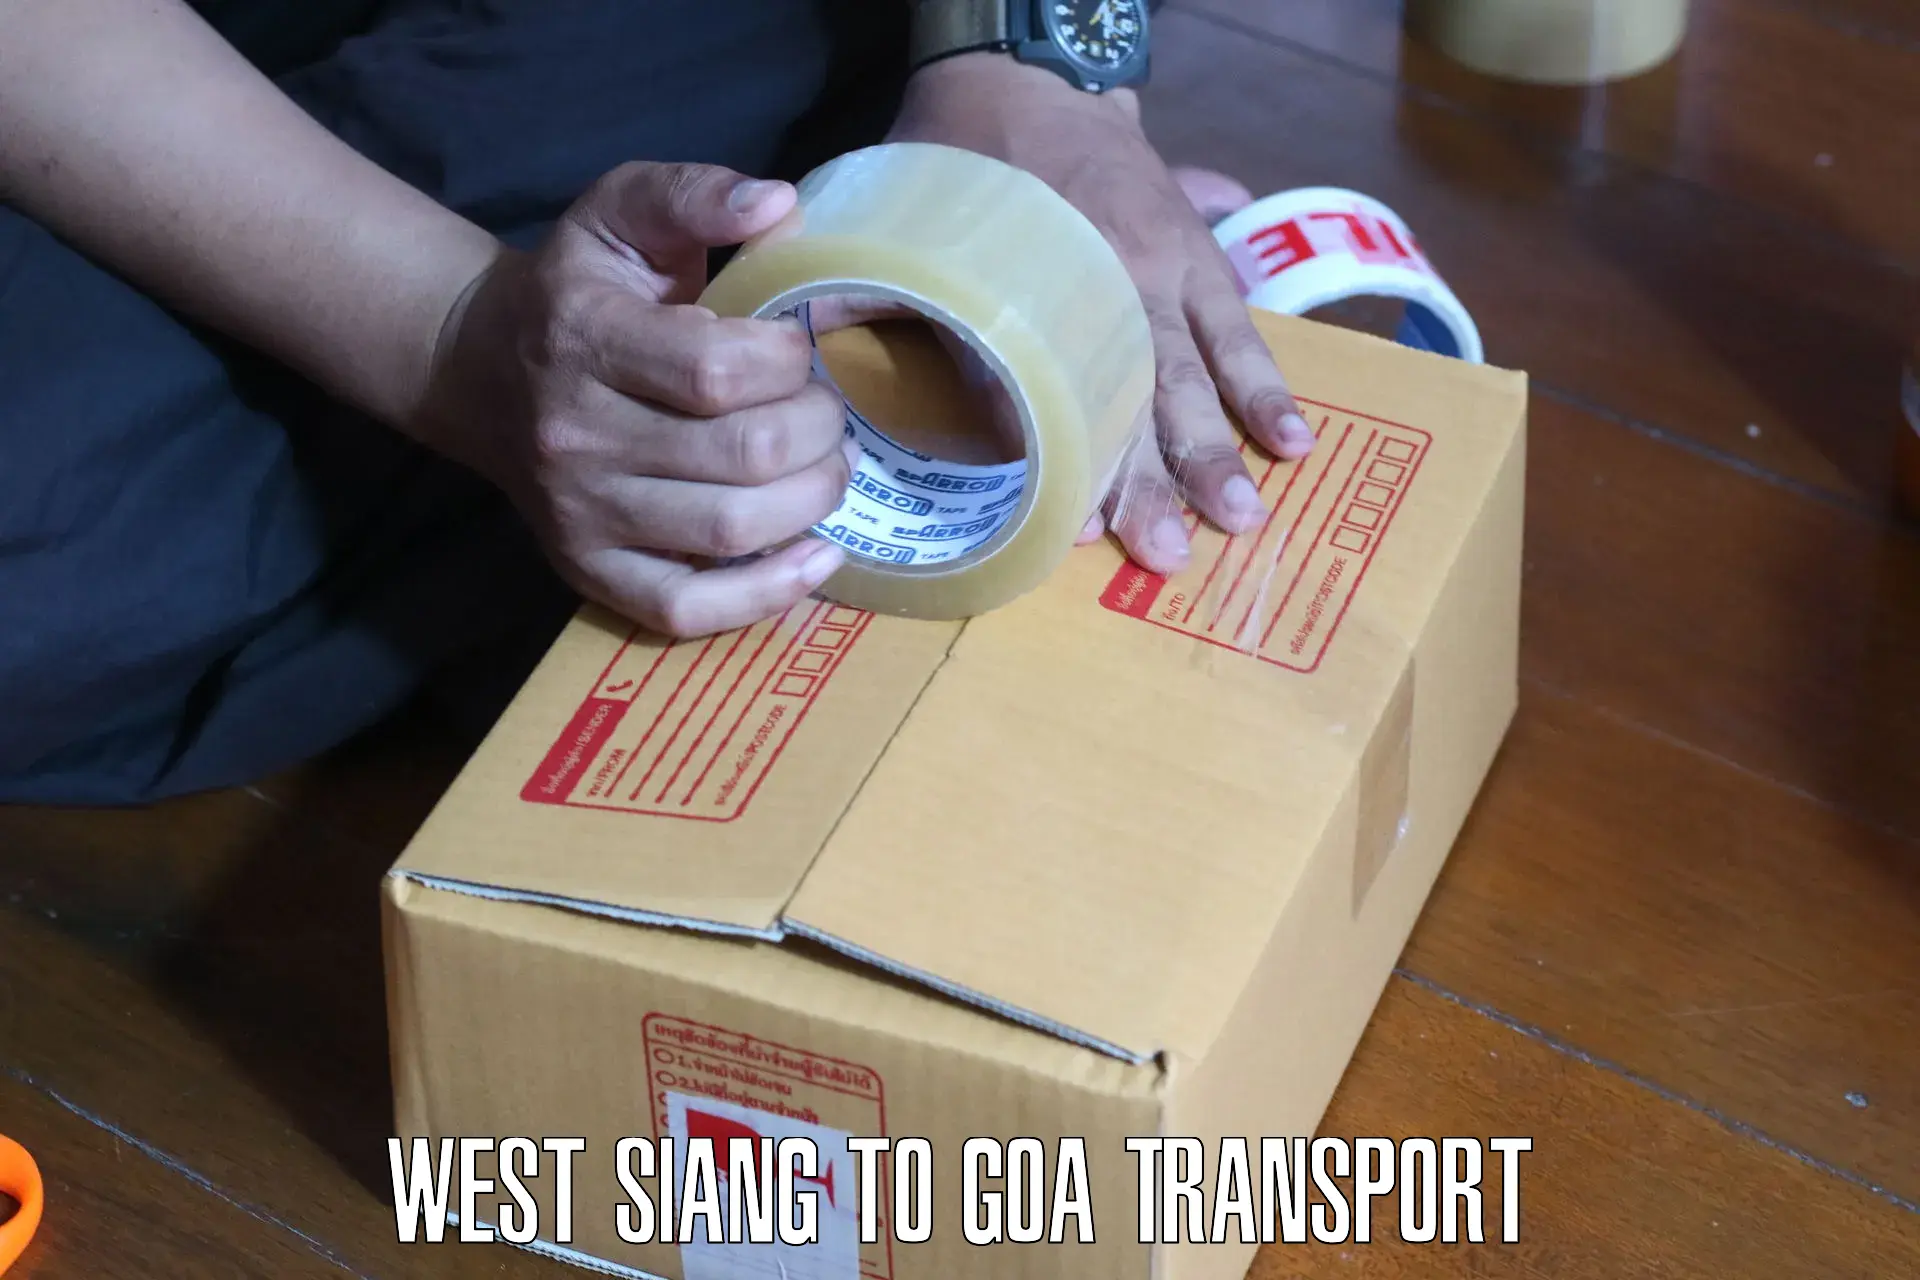 Cycle transportation service West Siang to Goa